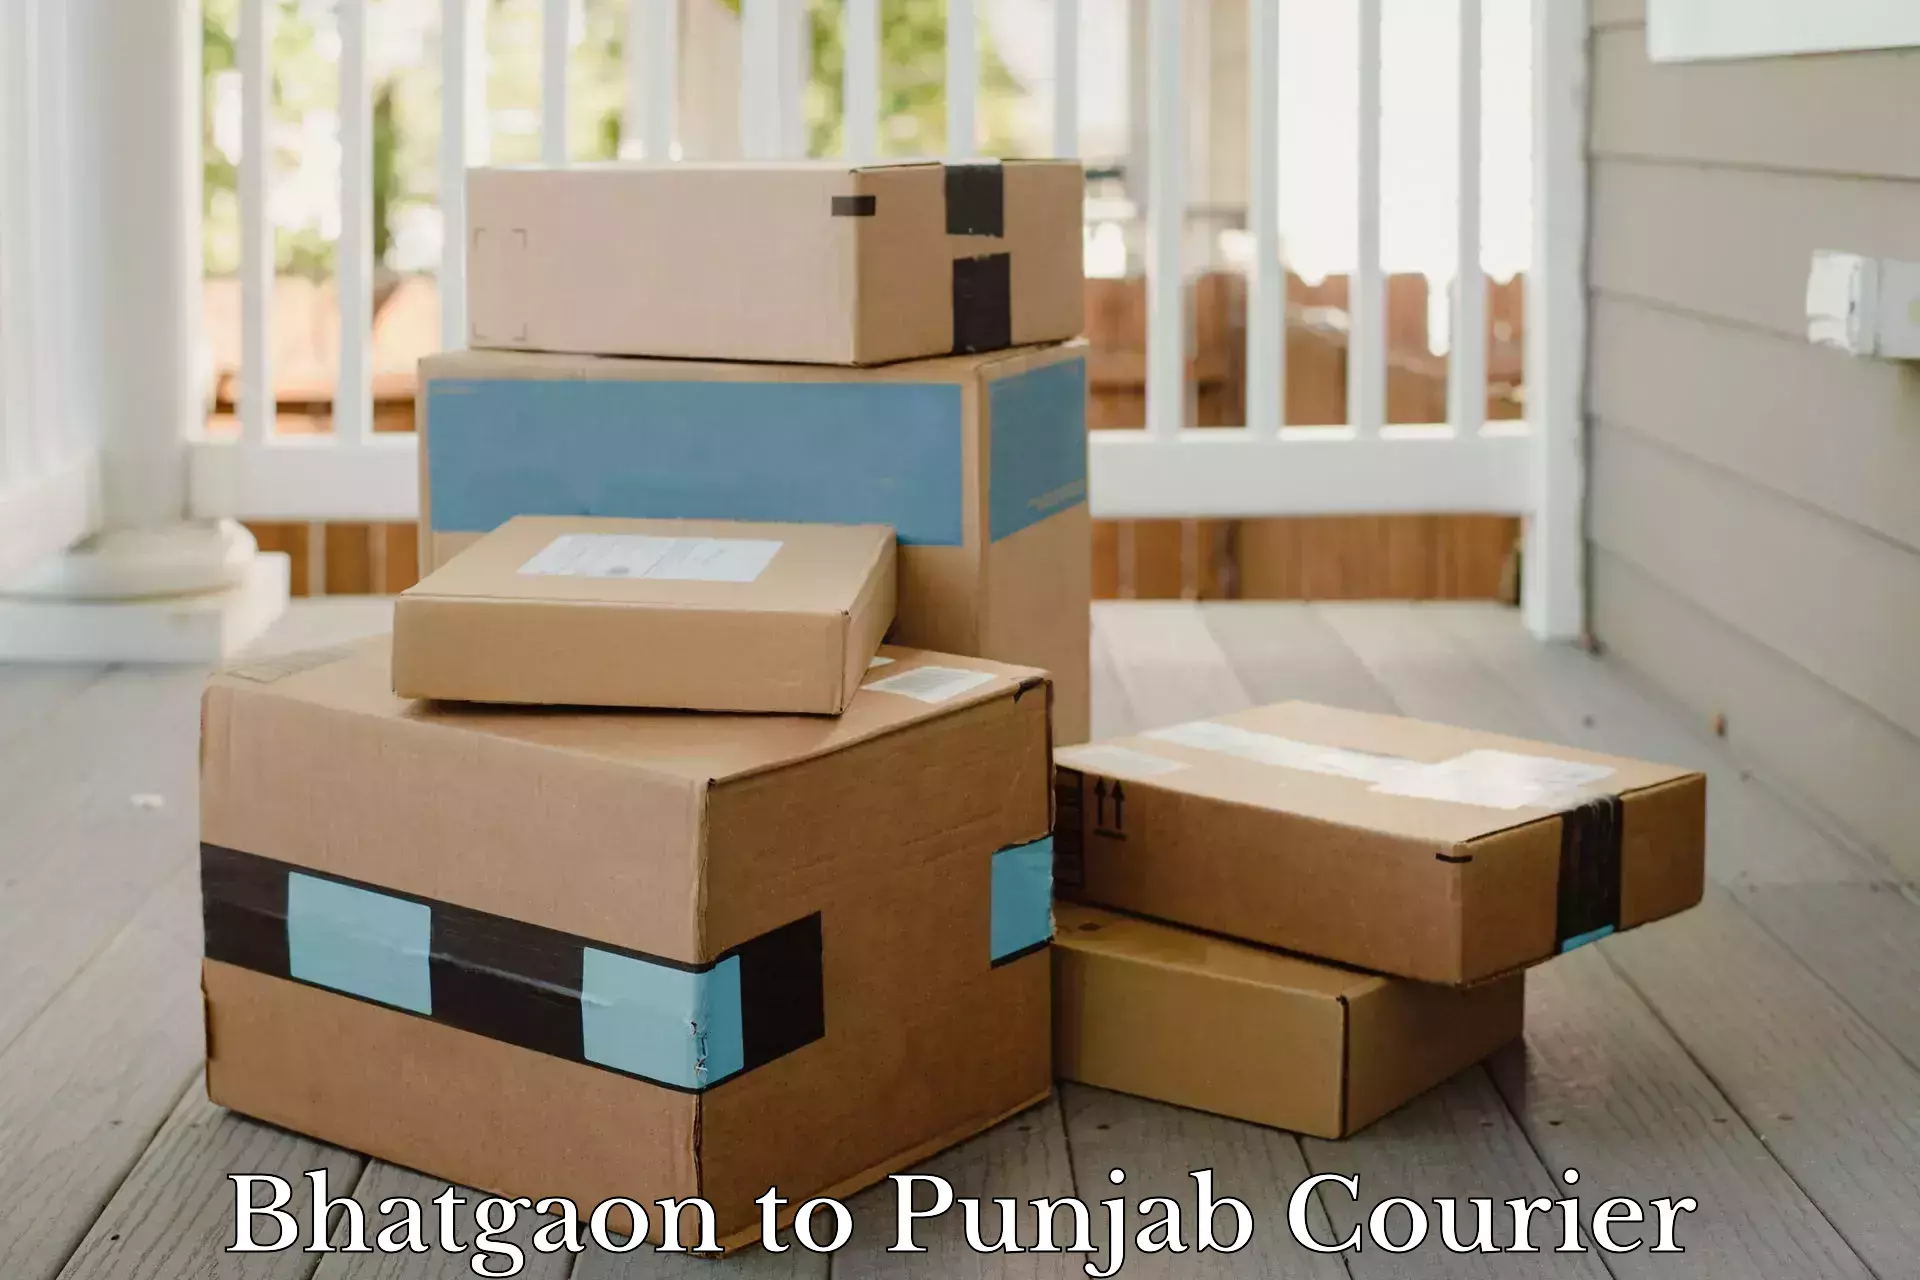 Automated parcel services Bhatgaon to Firozpur